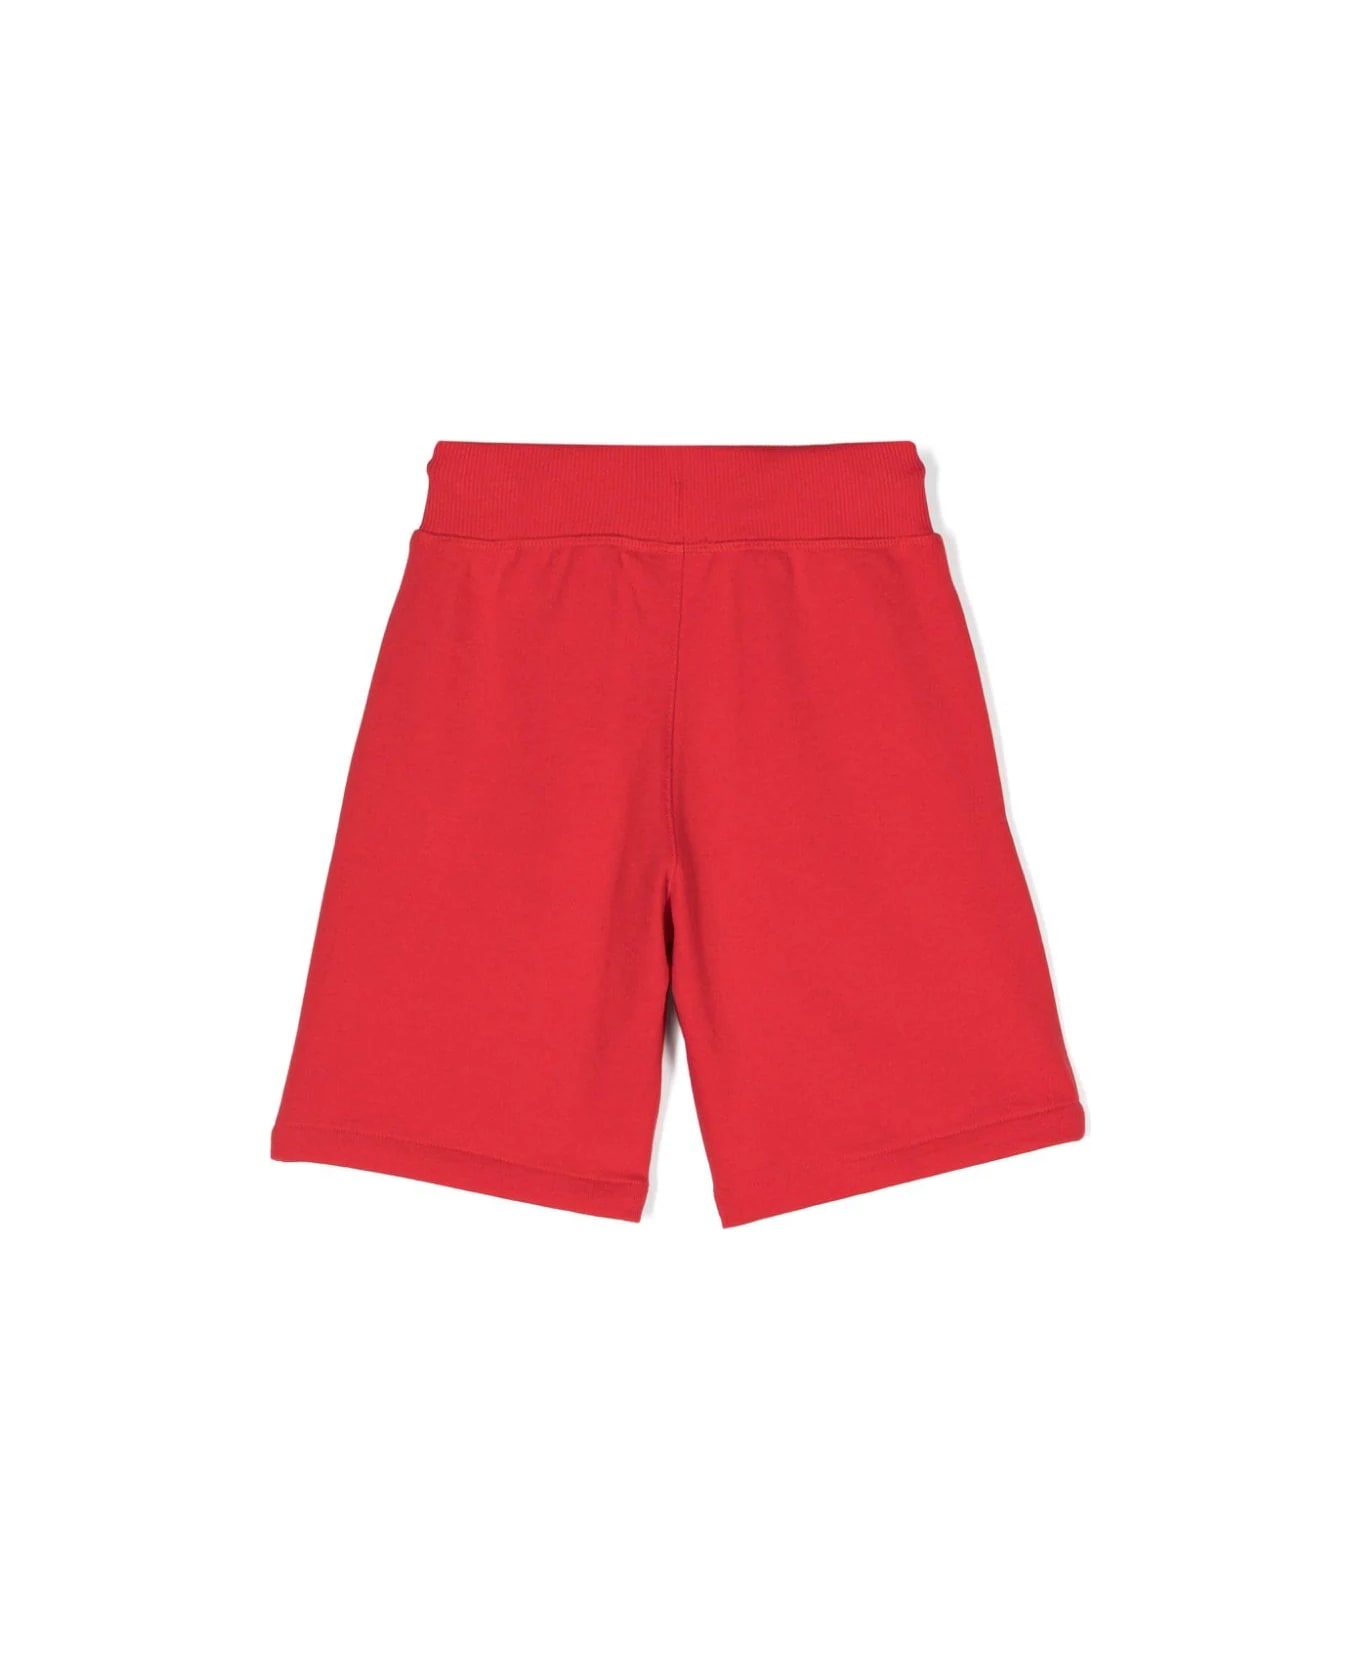 Hugo Boss Sports Shorts With Print - Red